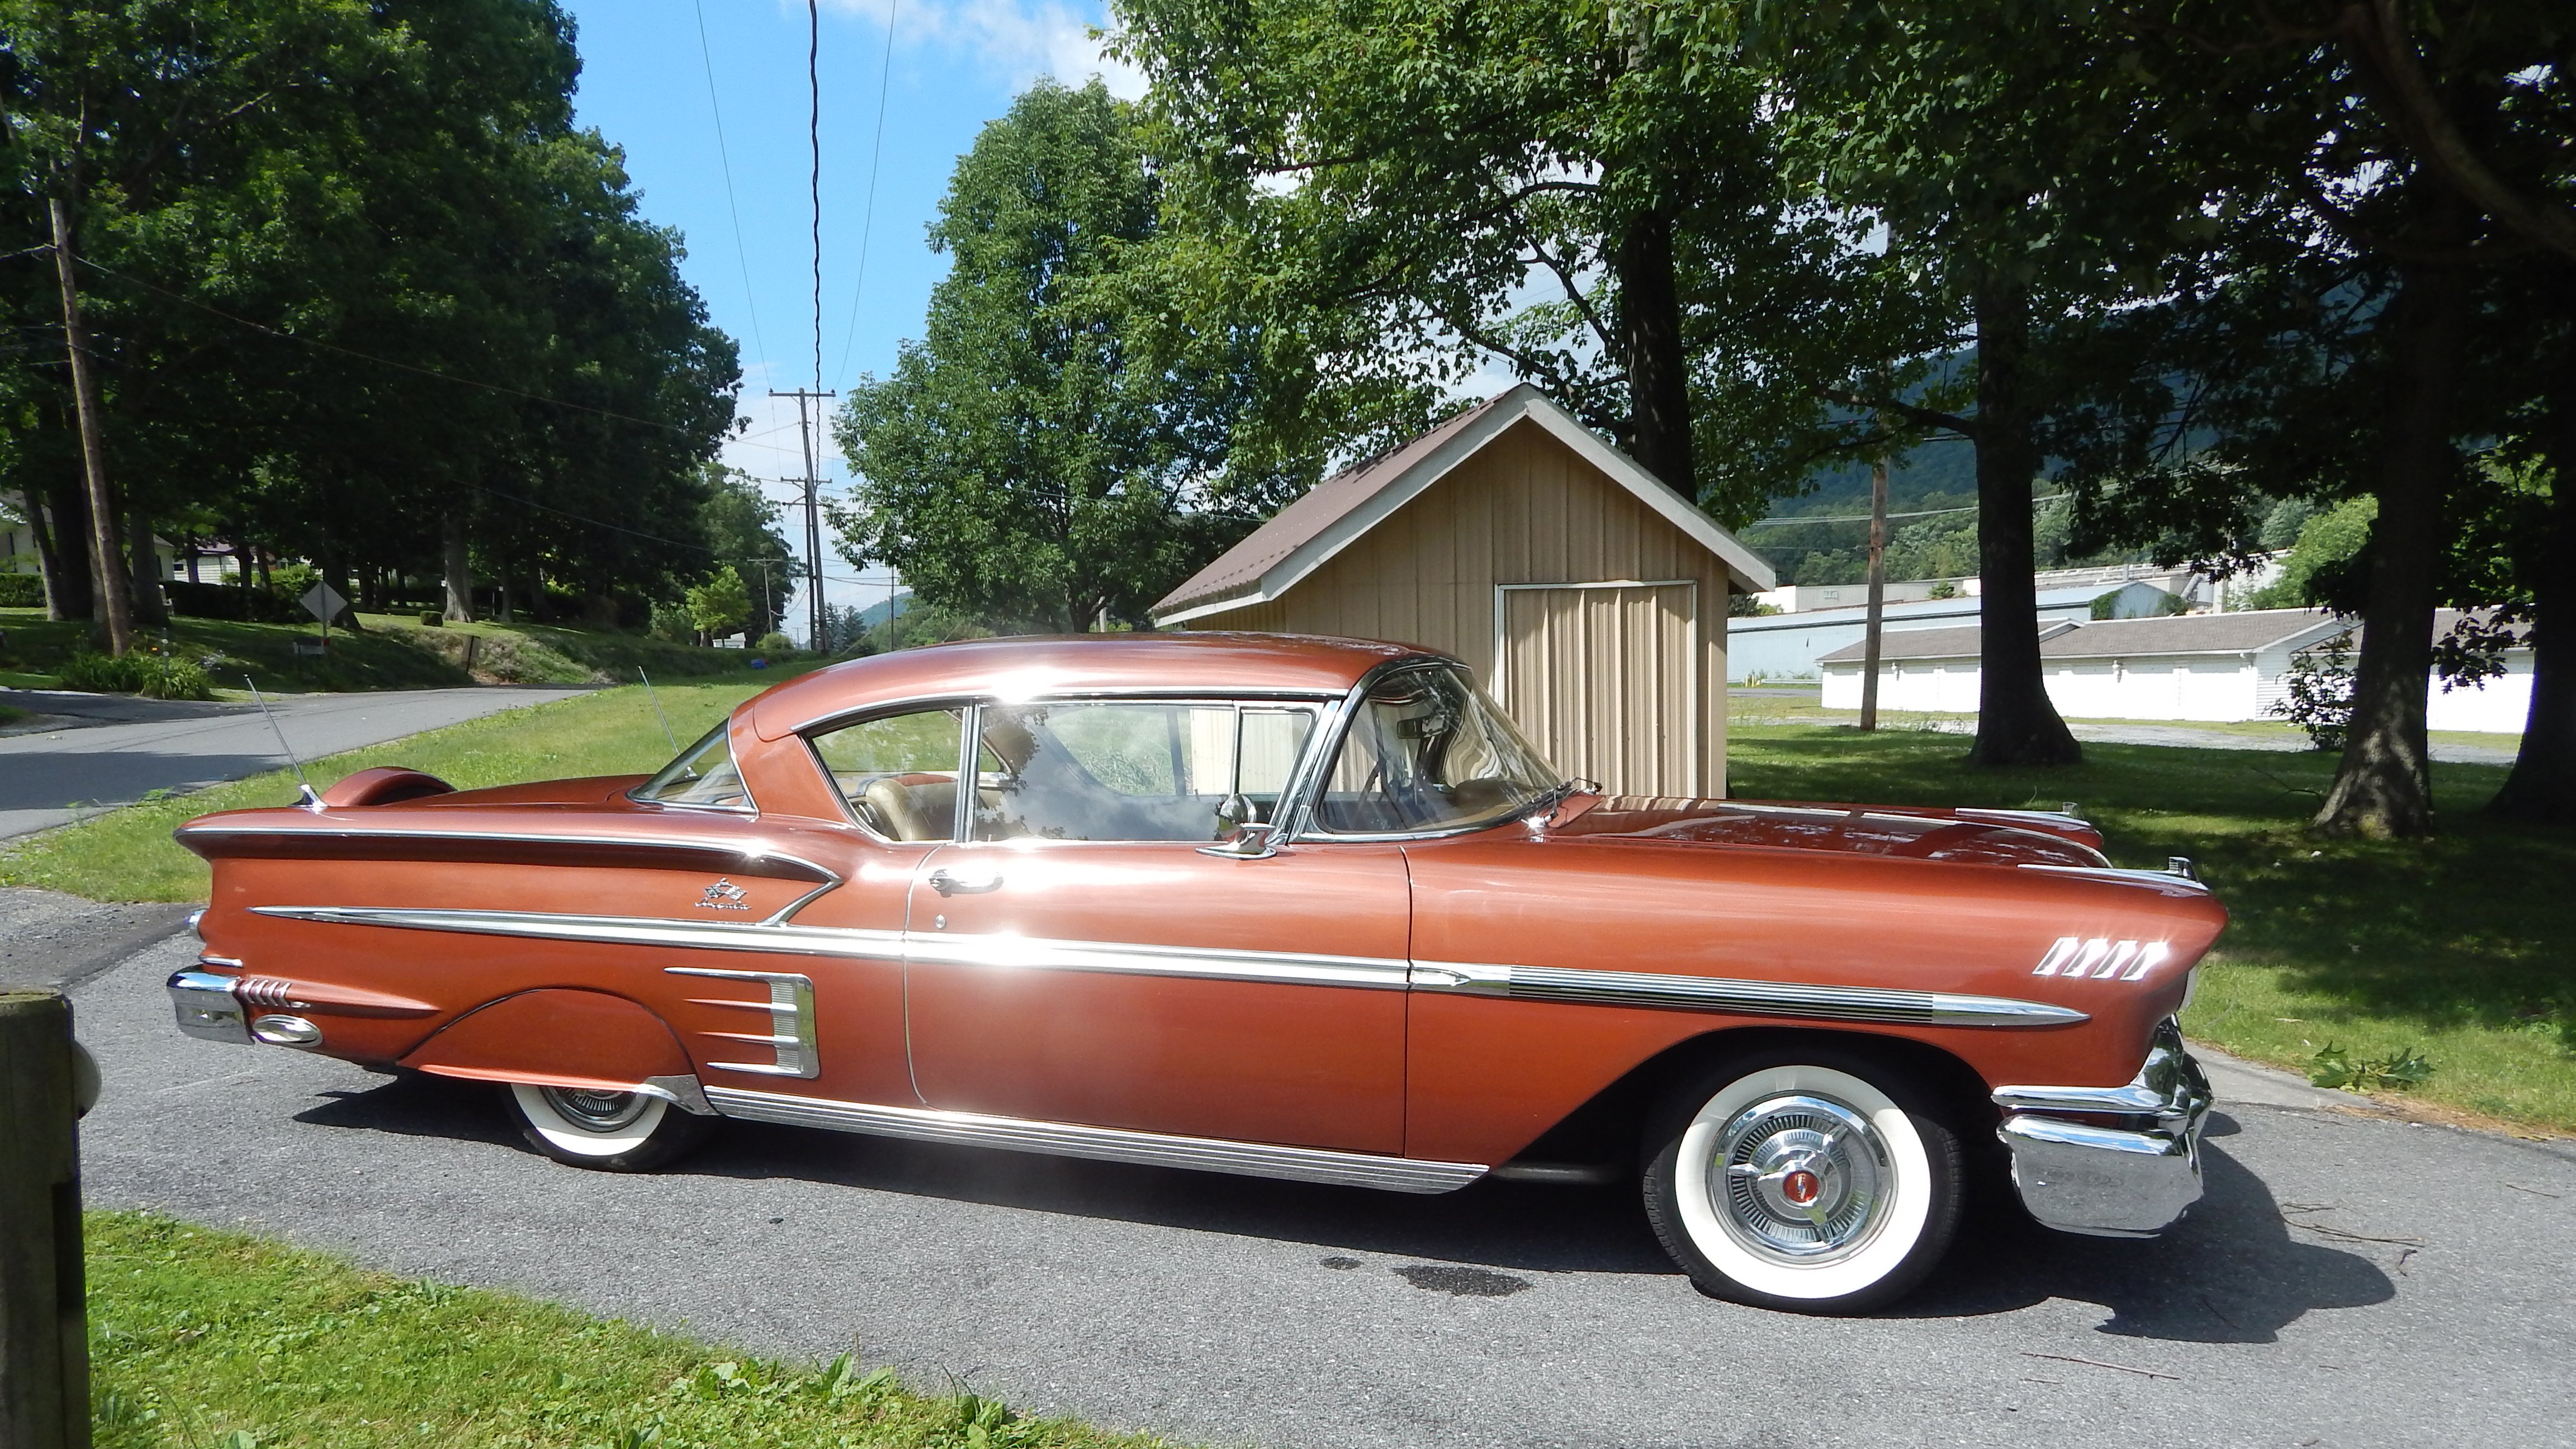 1958, Chevrolet, Impala, Coupe, Hardtop, Classic, Old, Usa, 4608x2592 02 Wallpaper